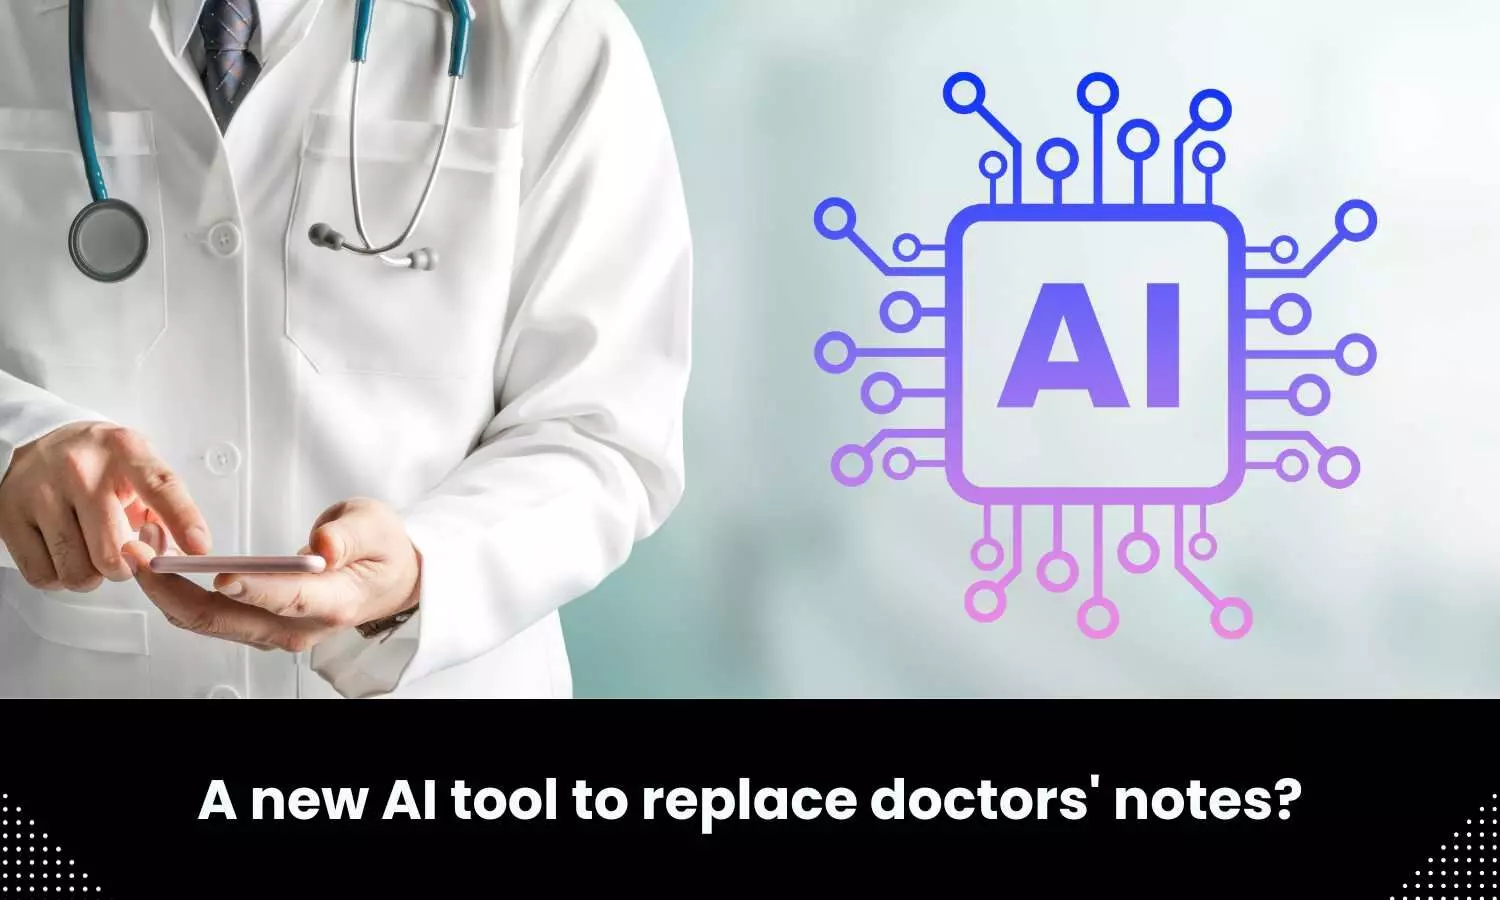 AI computer programme can generate doctors notes: Study